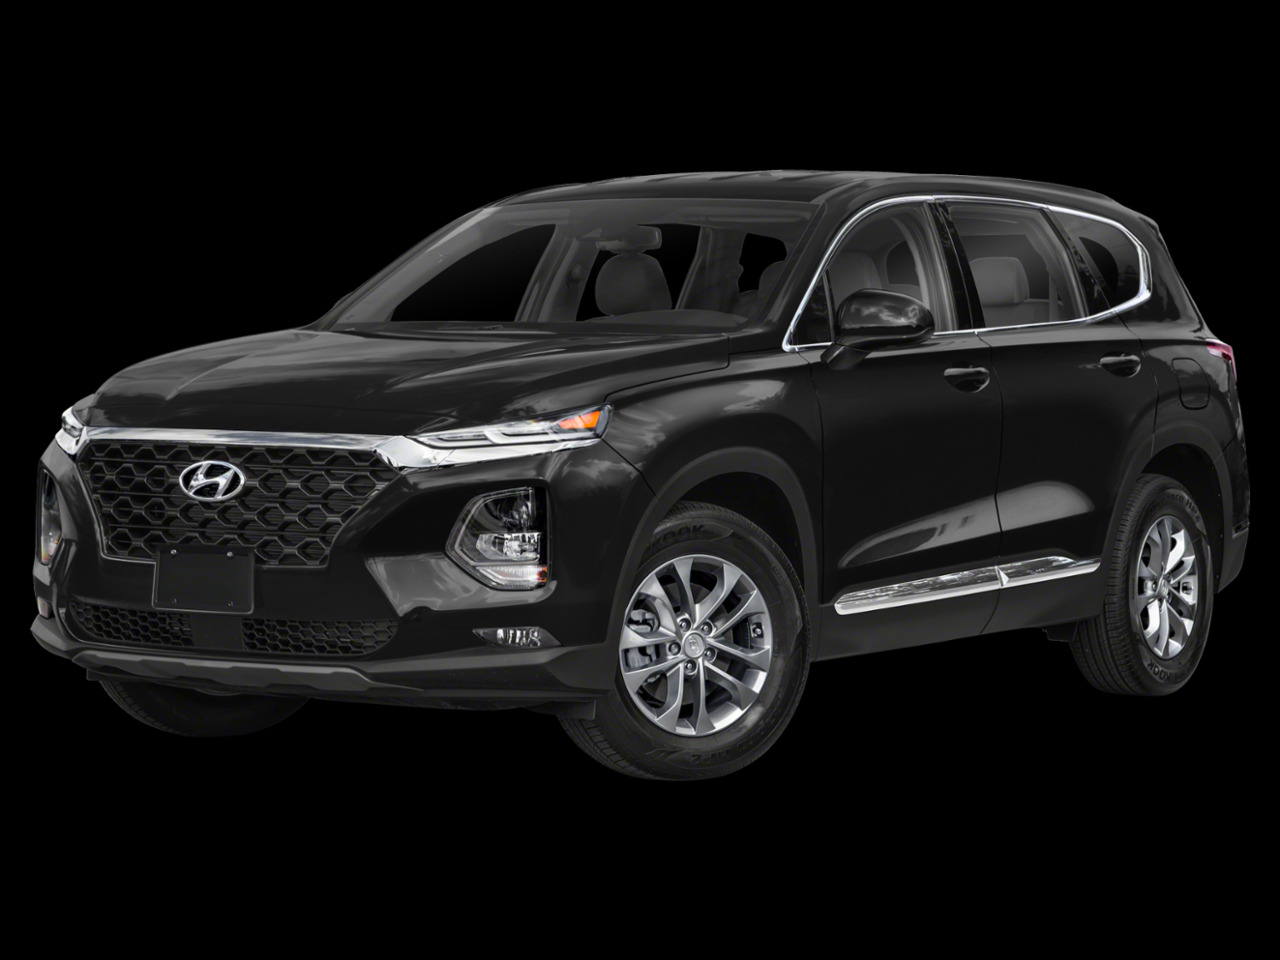 2020 Hyundai Santa Fe preferred awd with sun and leather package